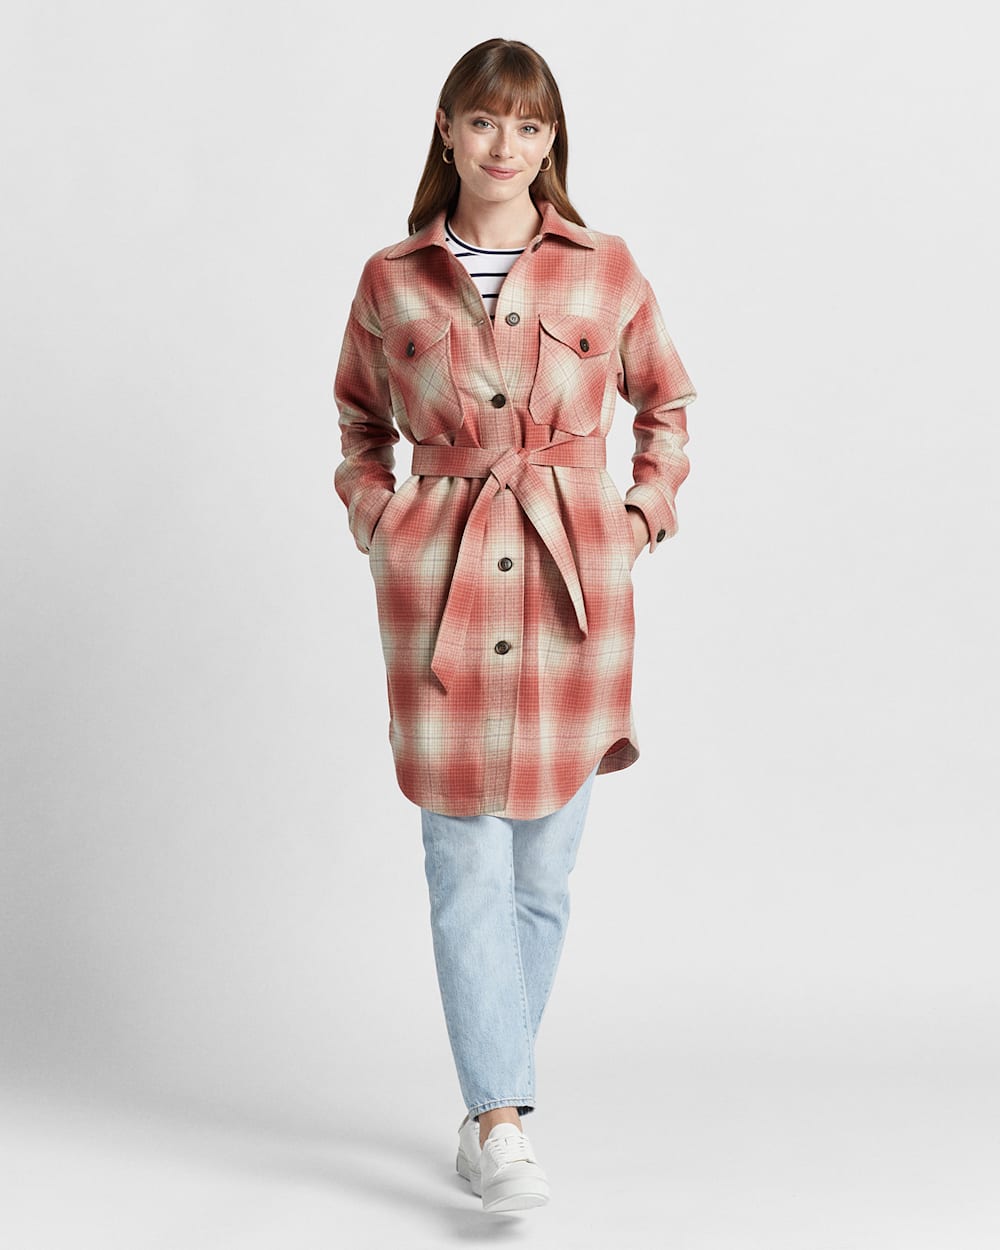 ALTERNATE VIEW OF WOMEN'S WOOL OVERSHIRT IN CORAL OMBRE PLAID image number 3